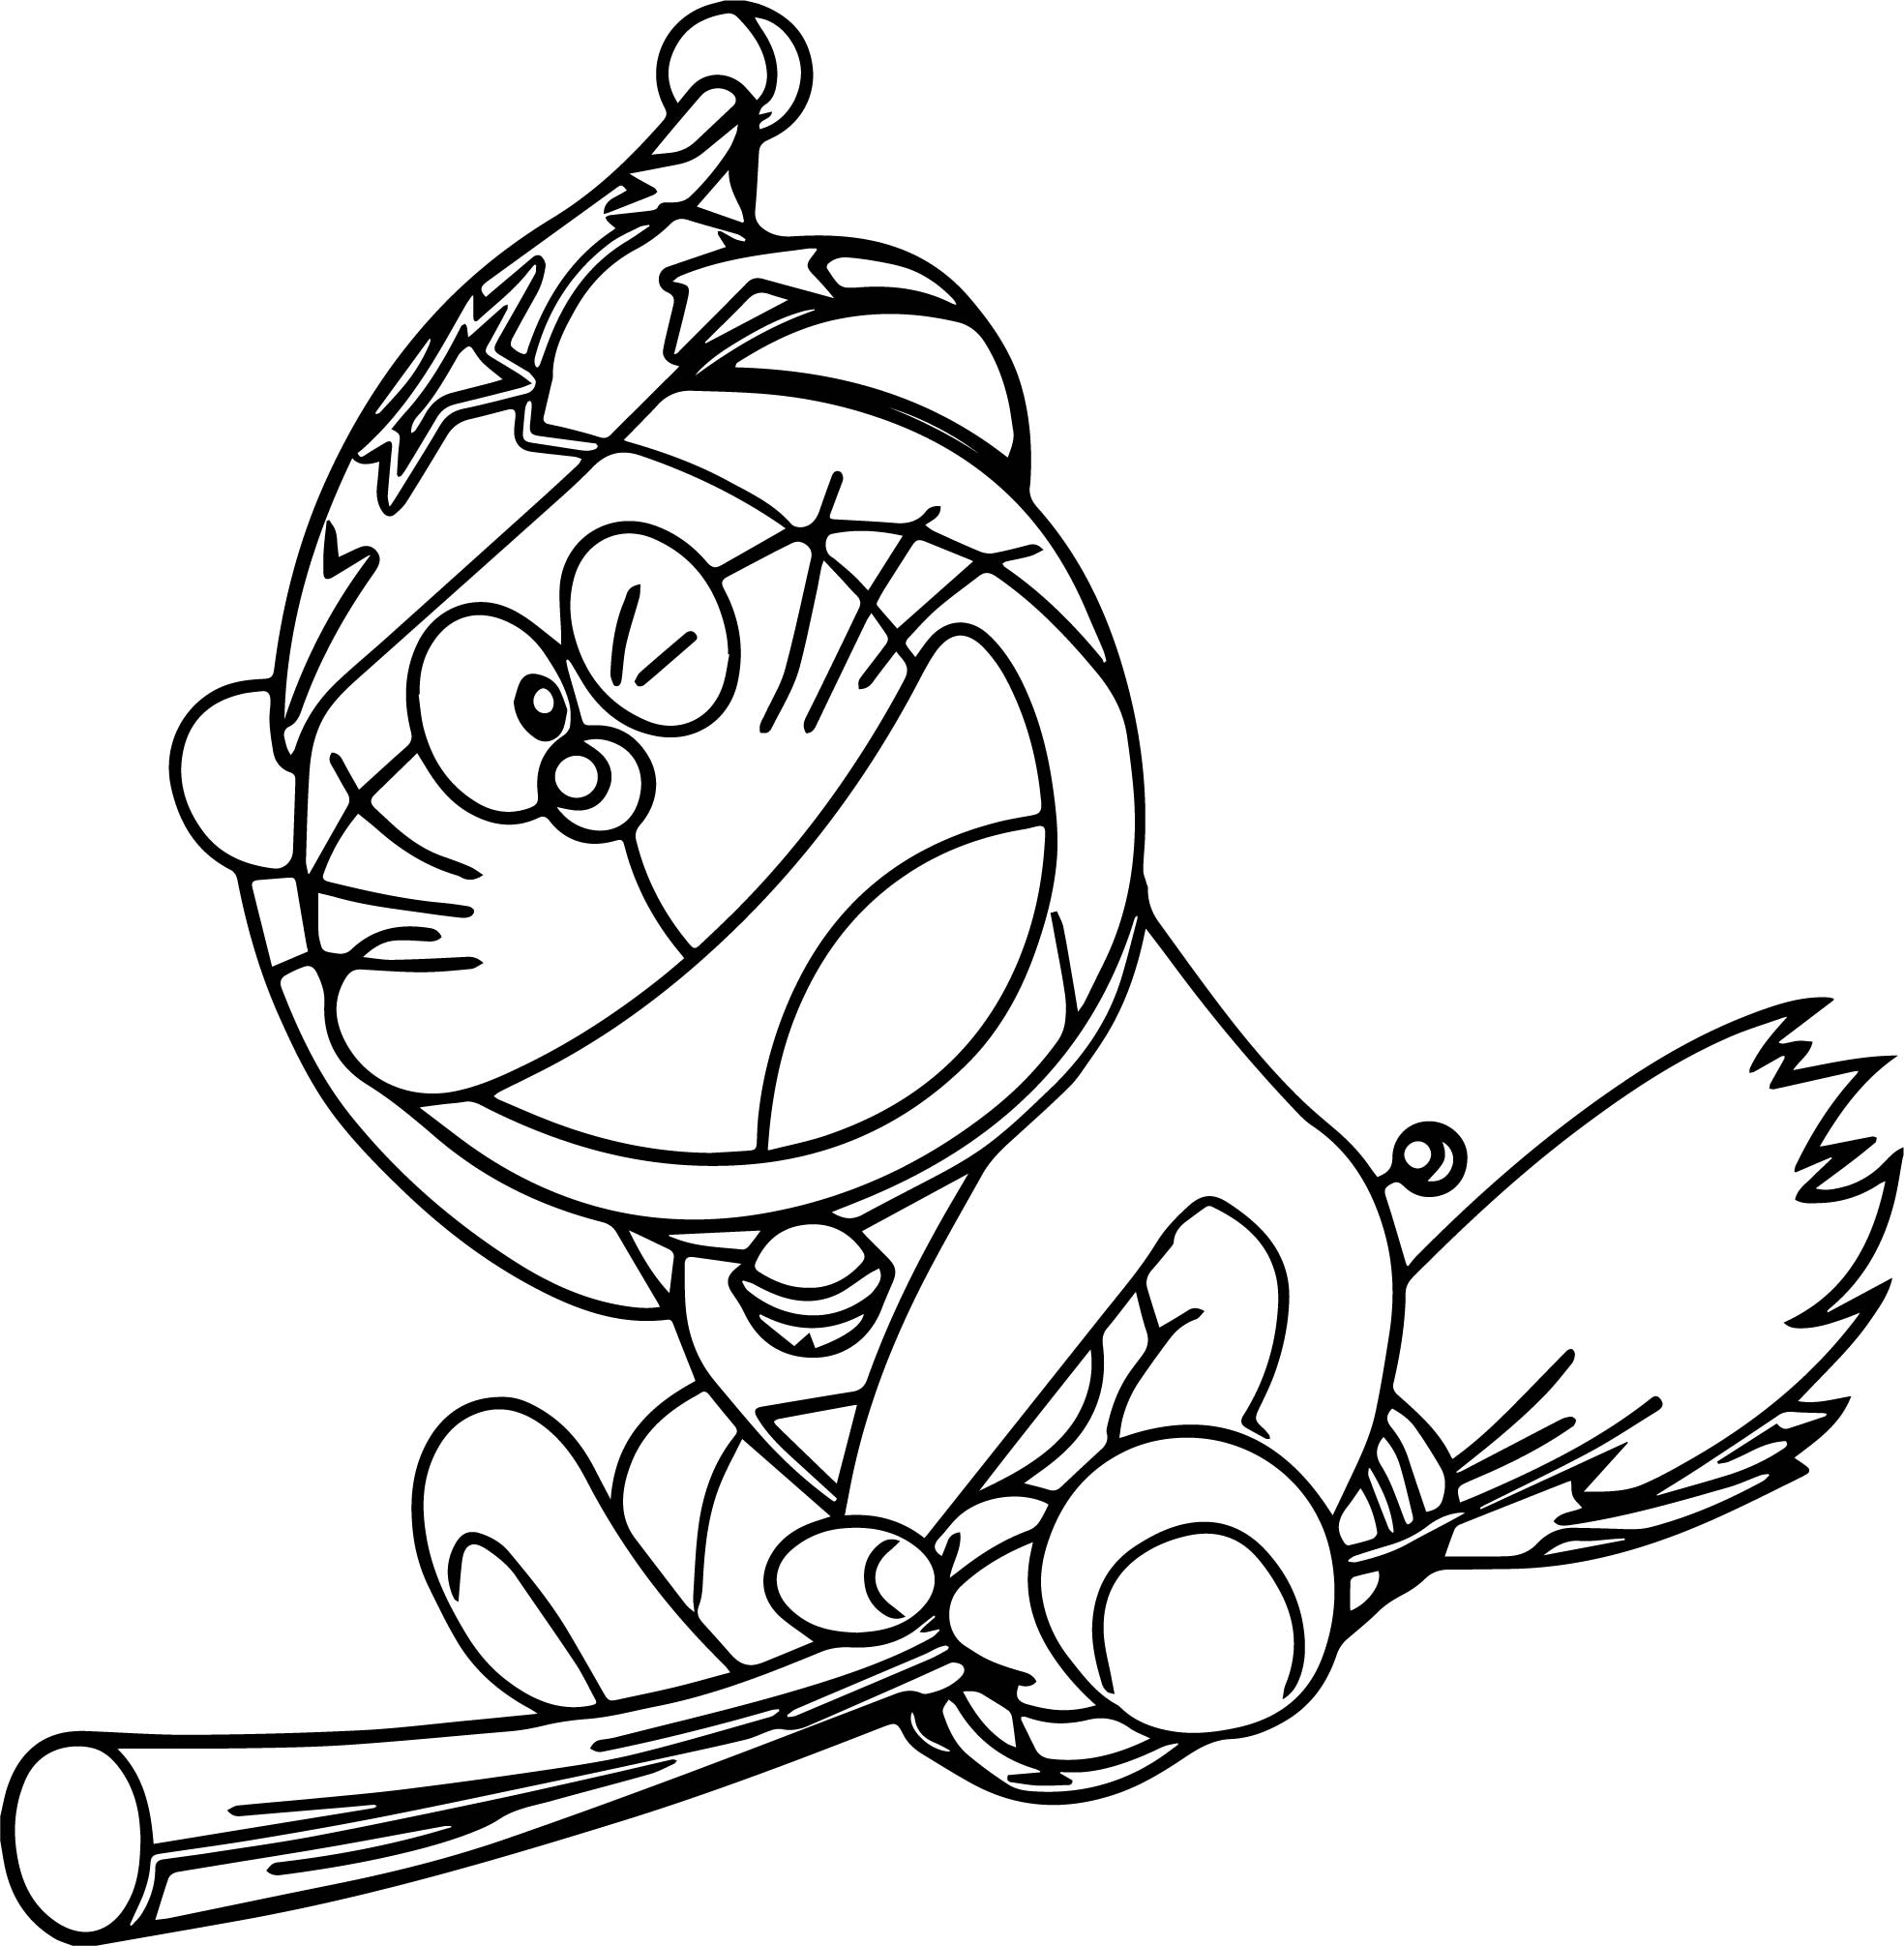 Doraemon Flying Coloring Page